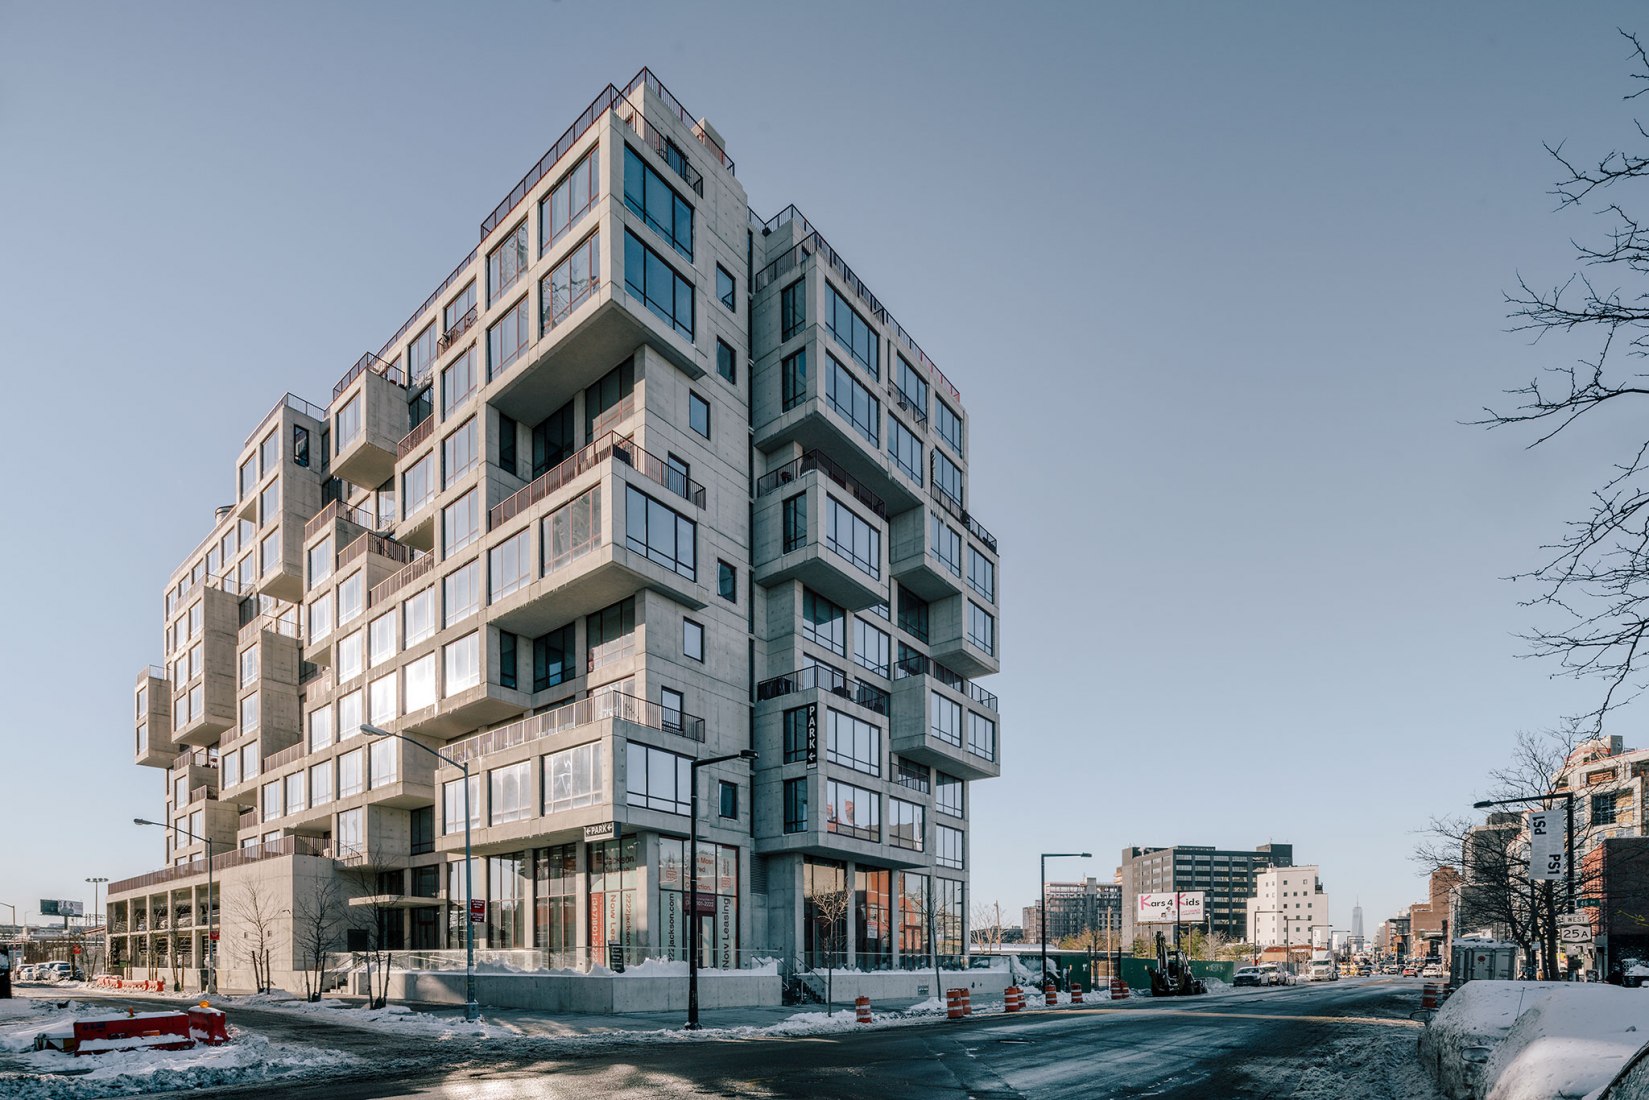 Modular strategy for 2222 Jackson Avenue housing by ODA | The 